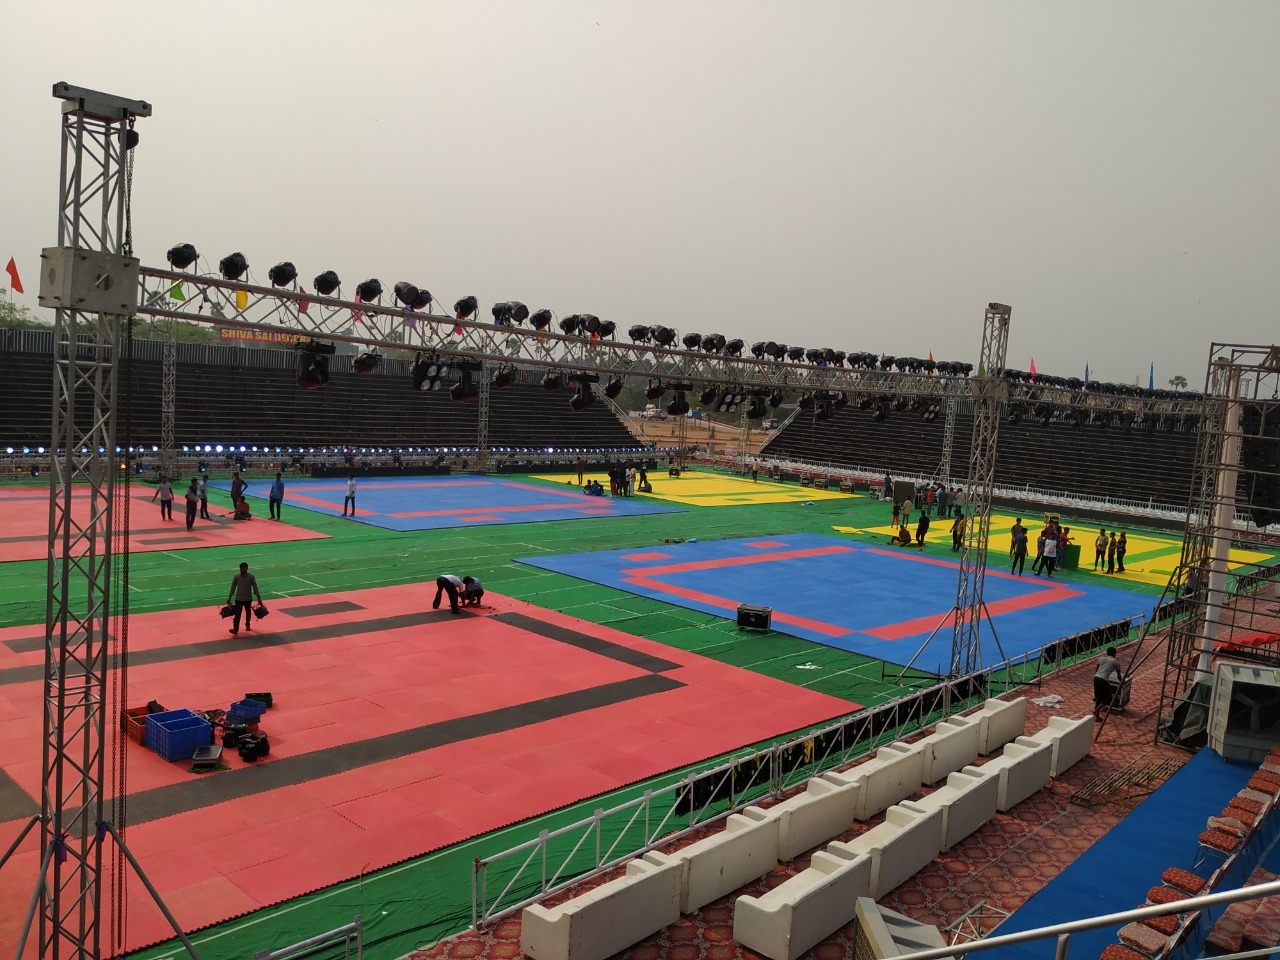 Suryapet is all set to host Junior Nationals